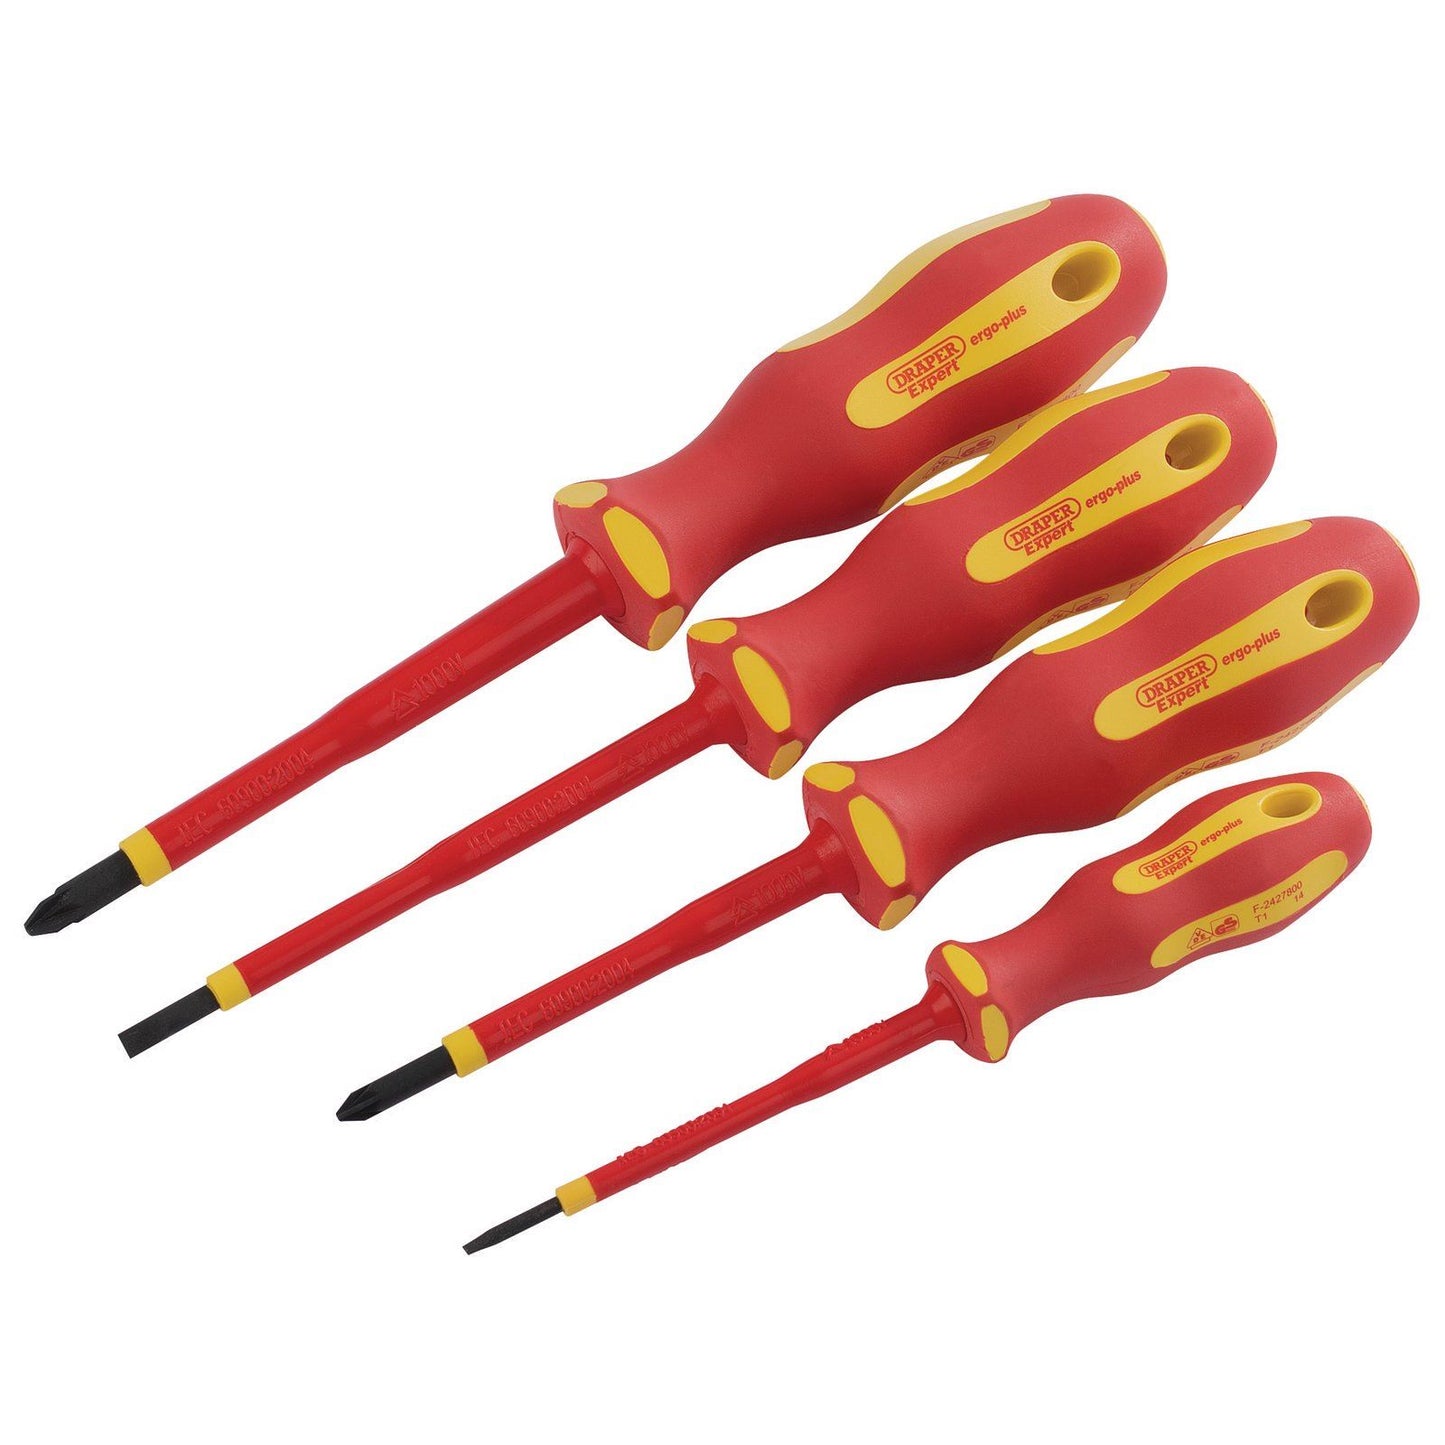 VDE Insulated Screwdriver 4pc Set for Professional Electricians Draper 64693